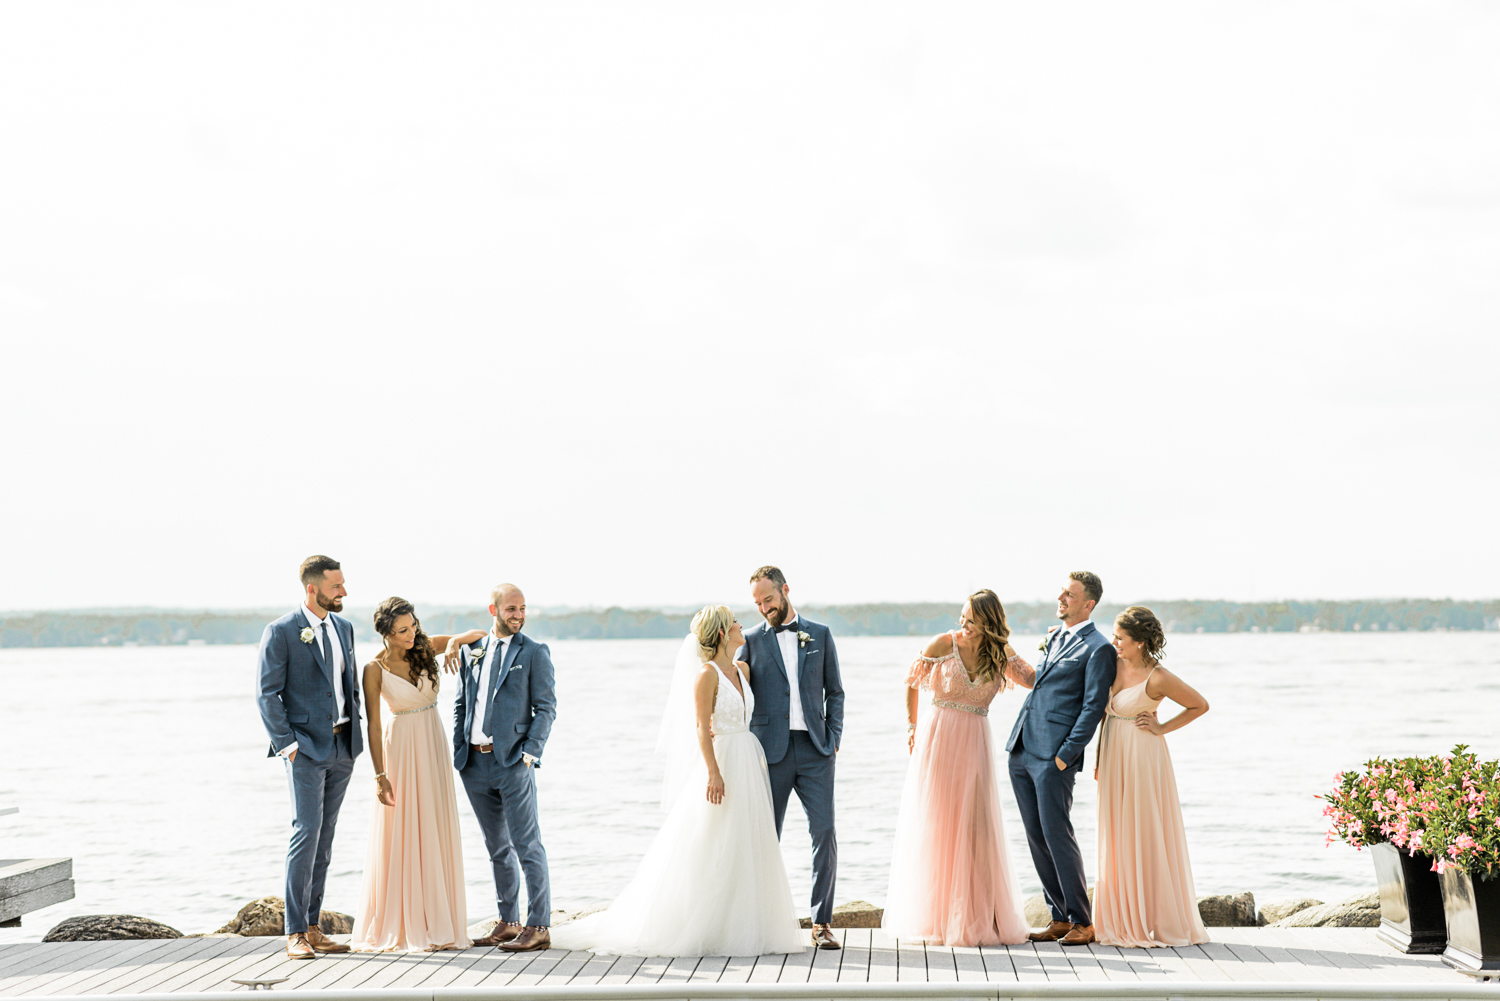 Bridal party on a dock overlooking a lake